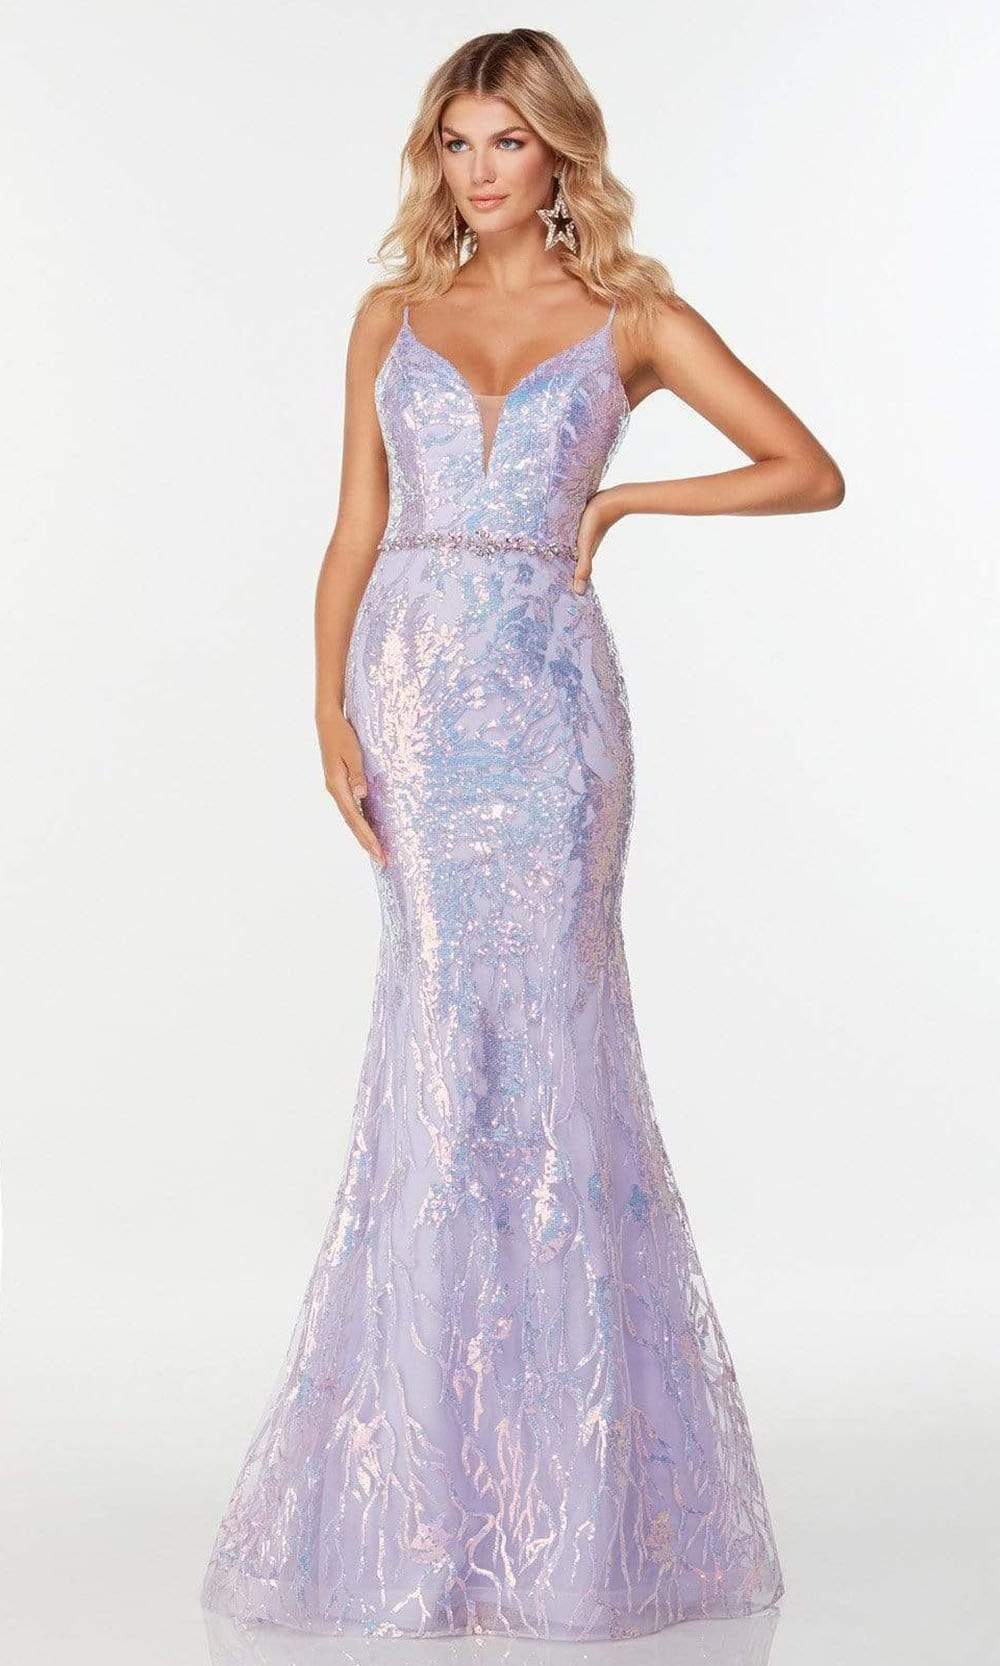 Alyce Paris - 61090 Holographic Shimmer Trumpet Gown Prom Dresses 000 / Light Orchid